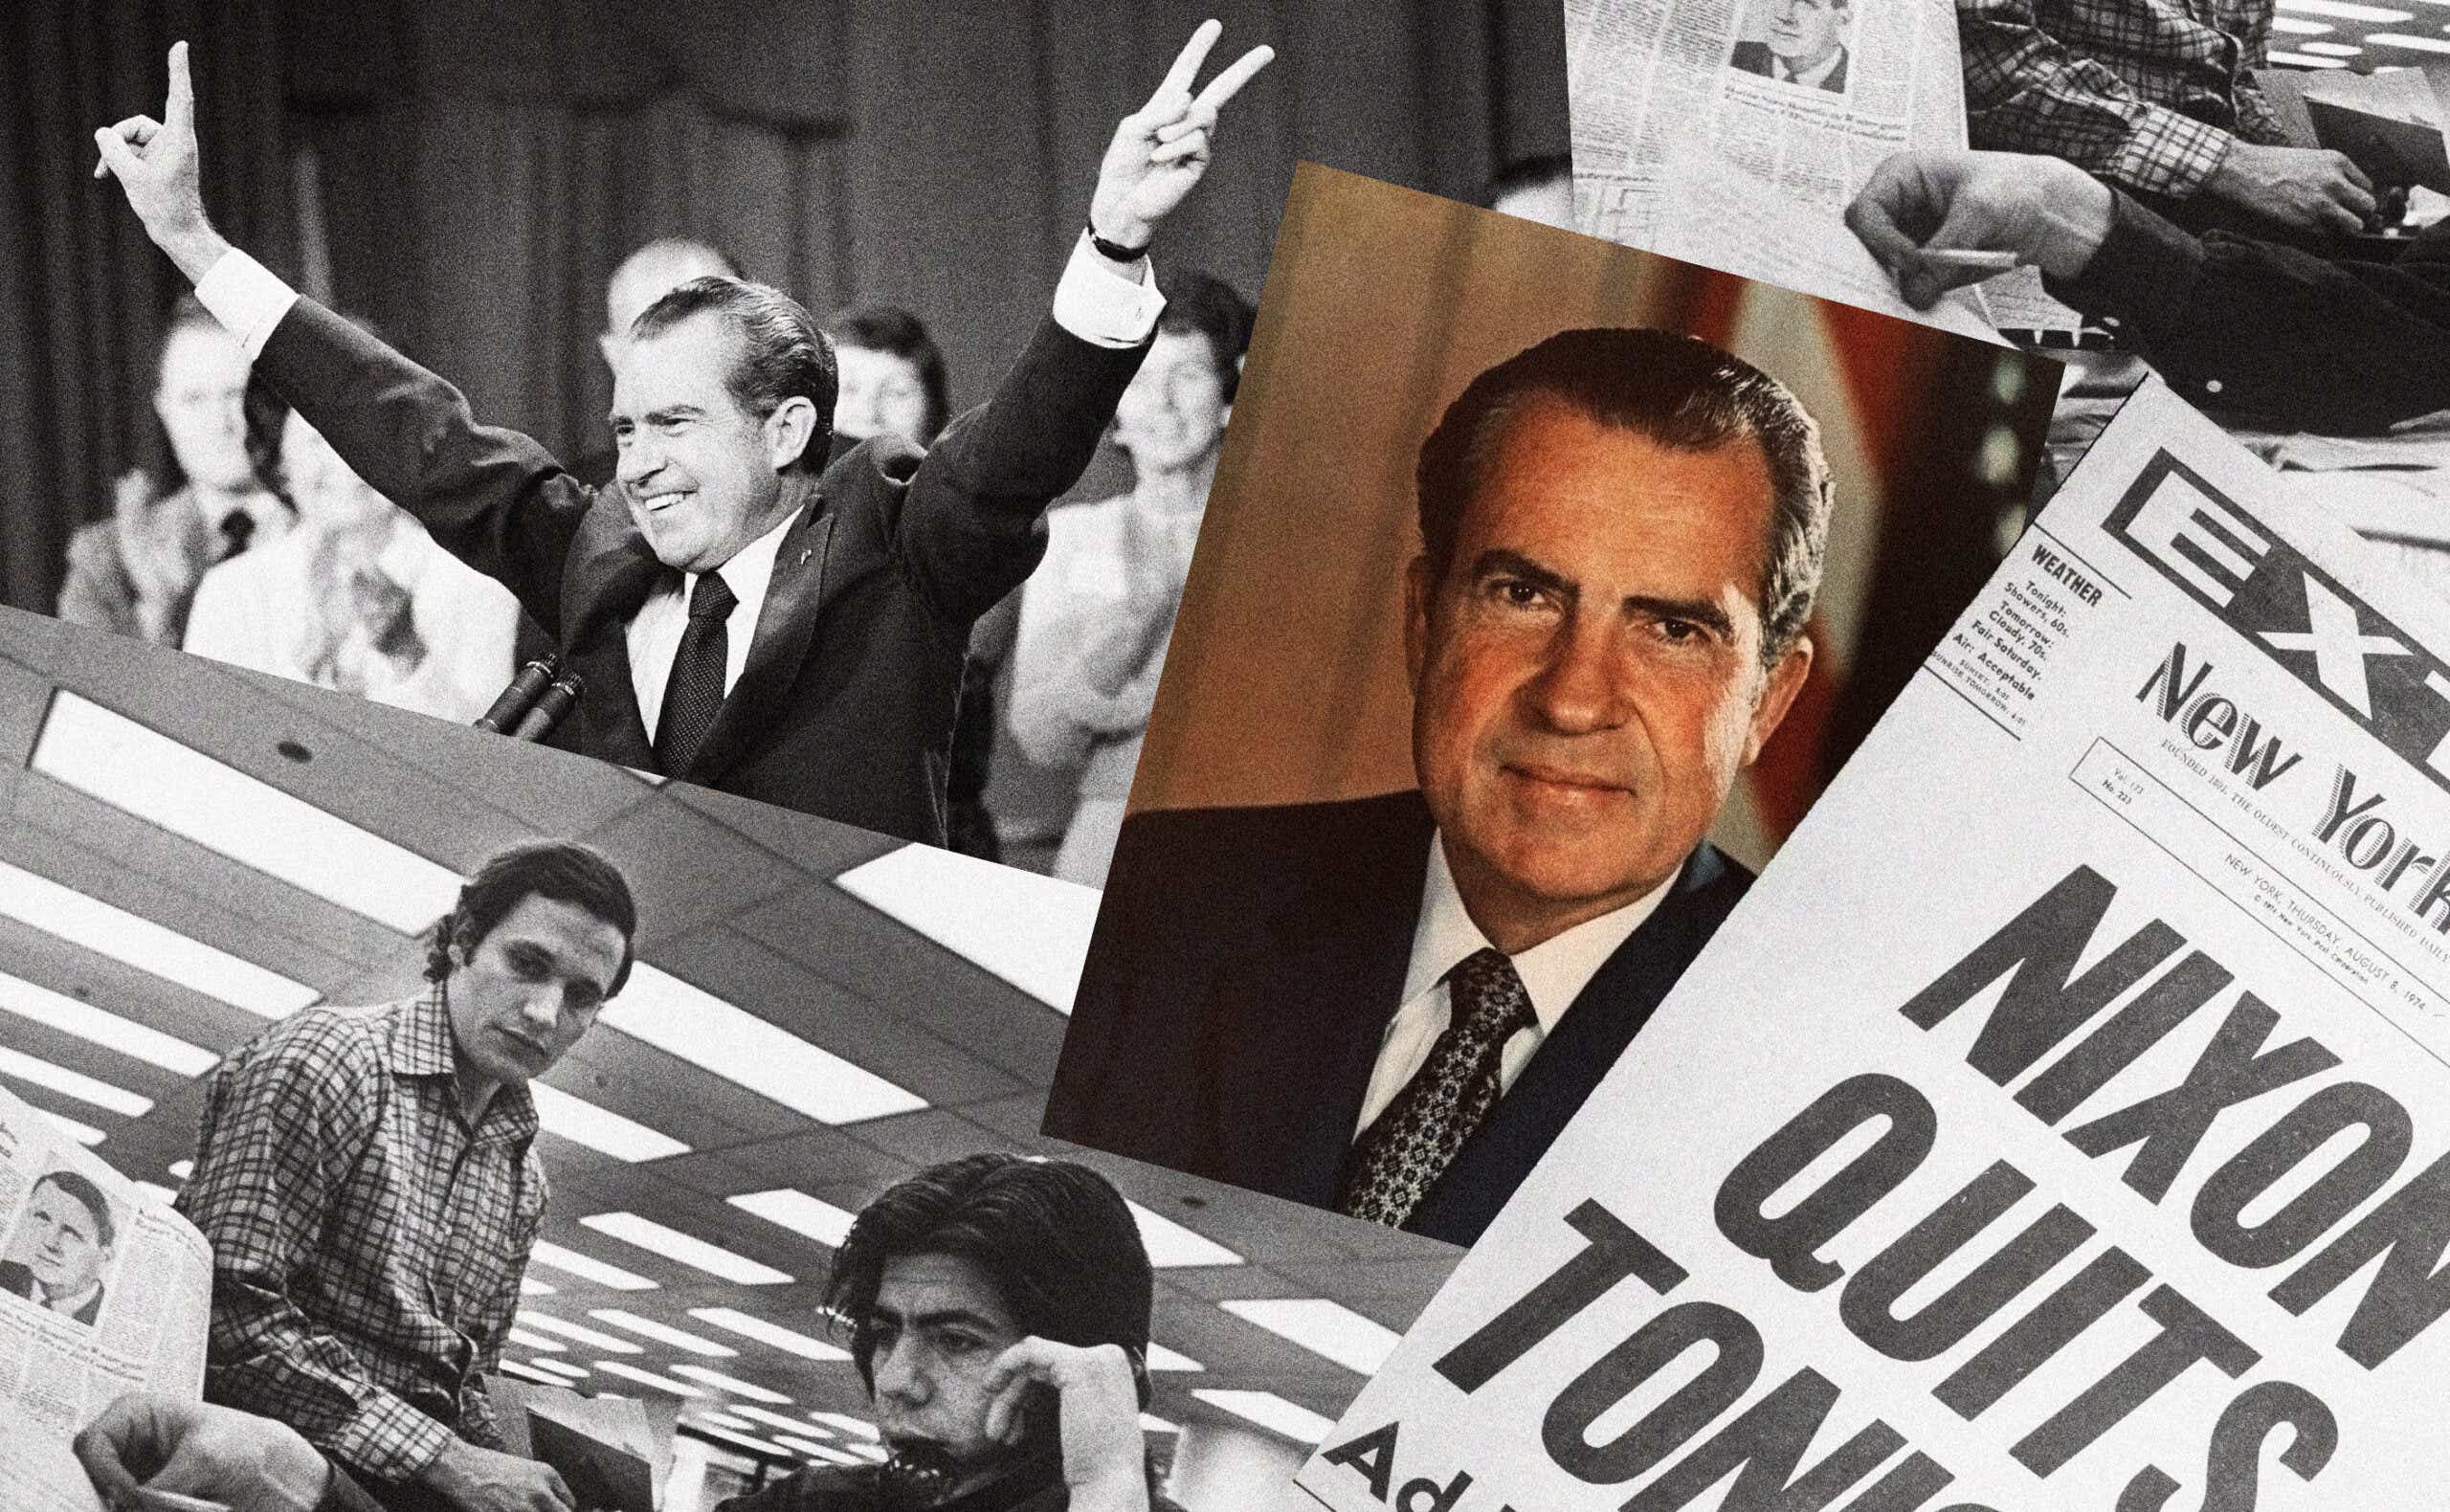 collage of images involving Watergate